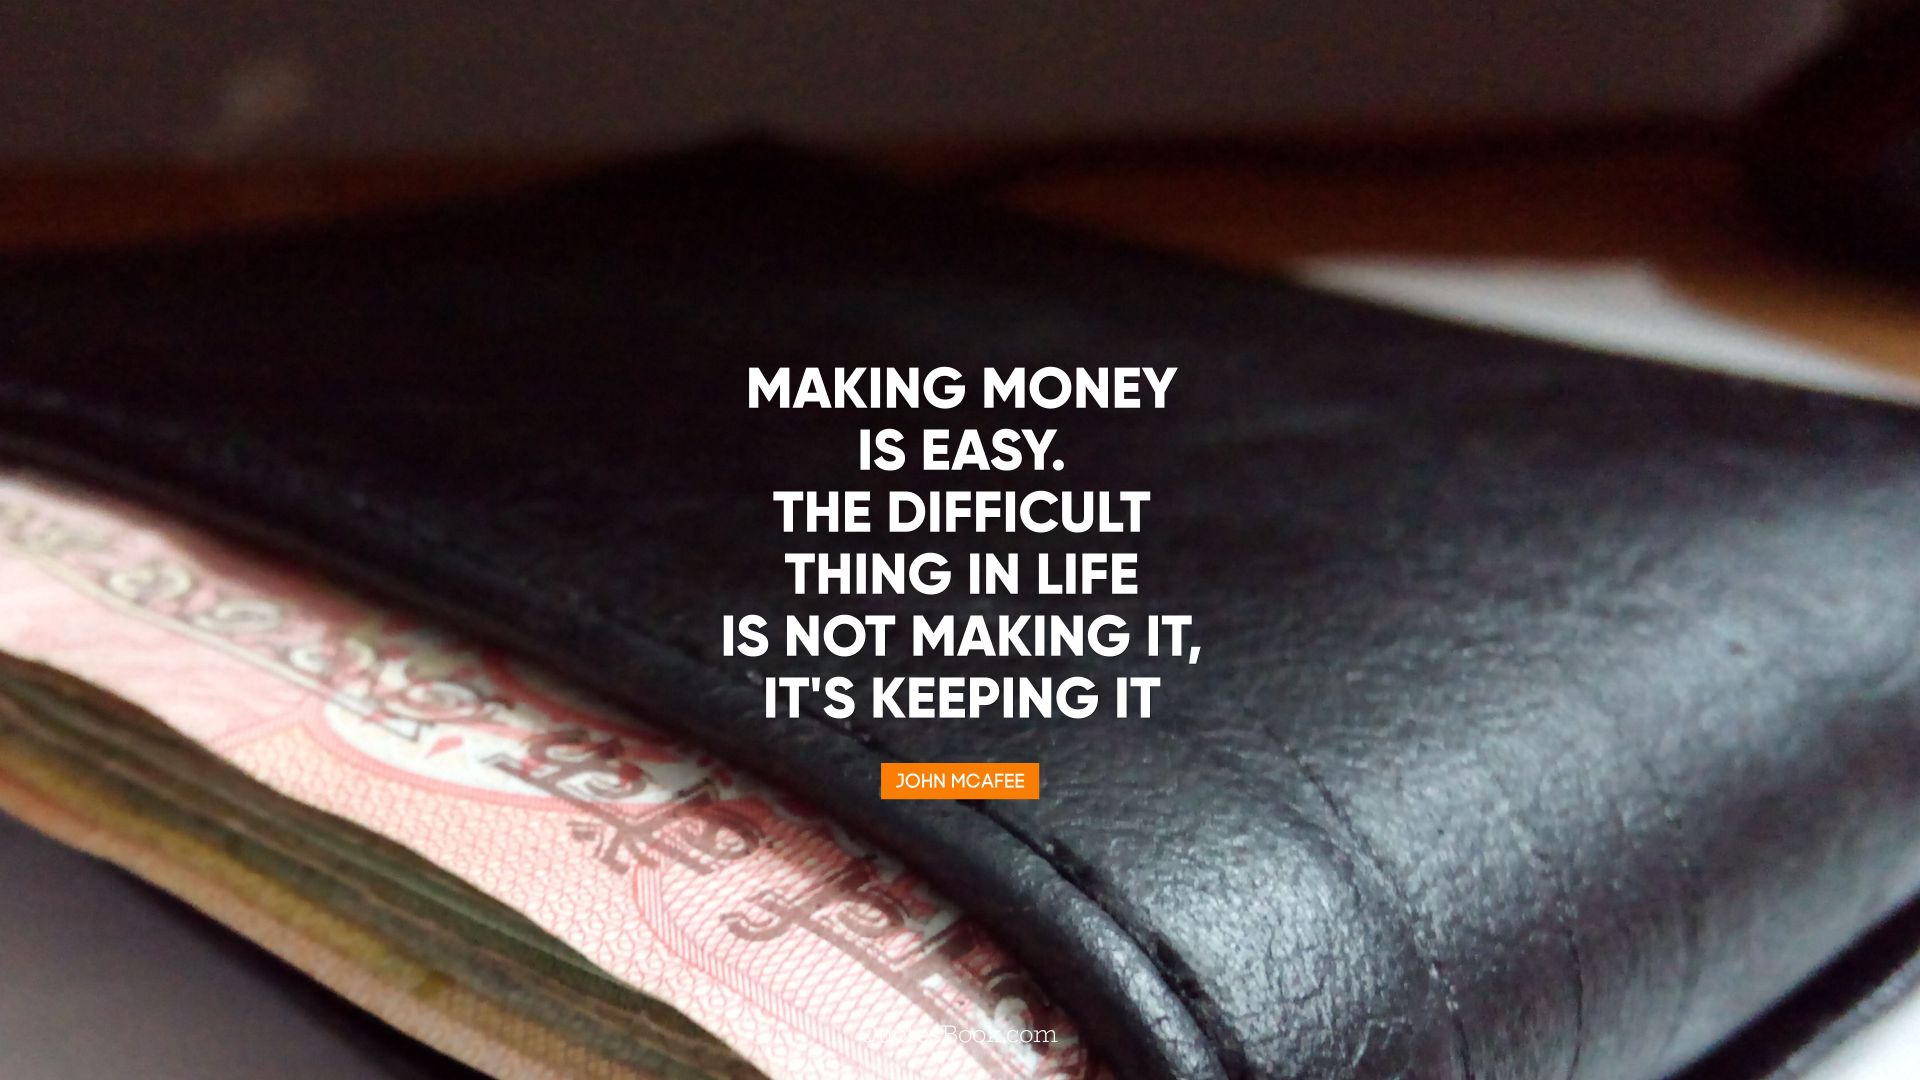 Making money is easy. The difficult 
thing in life is not making it, it's keeping it. - Quote by John McAfee